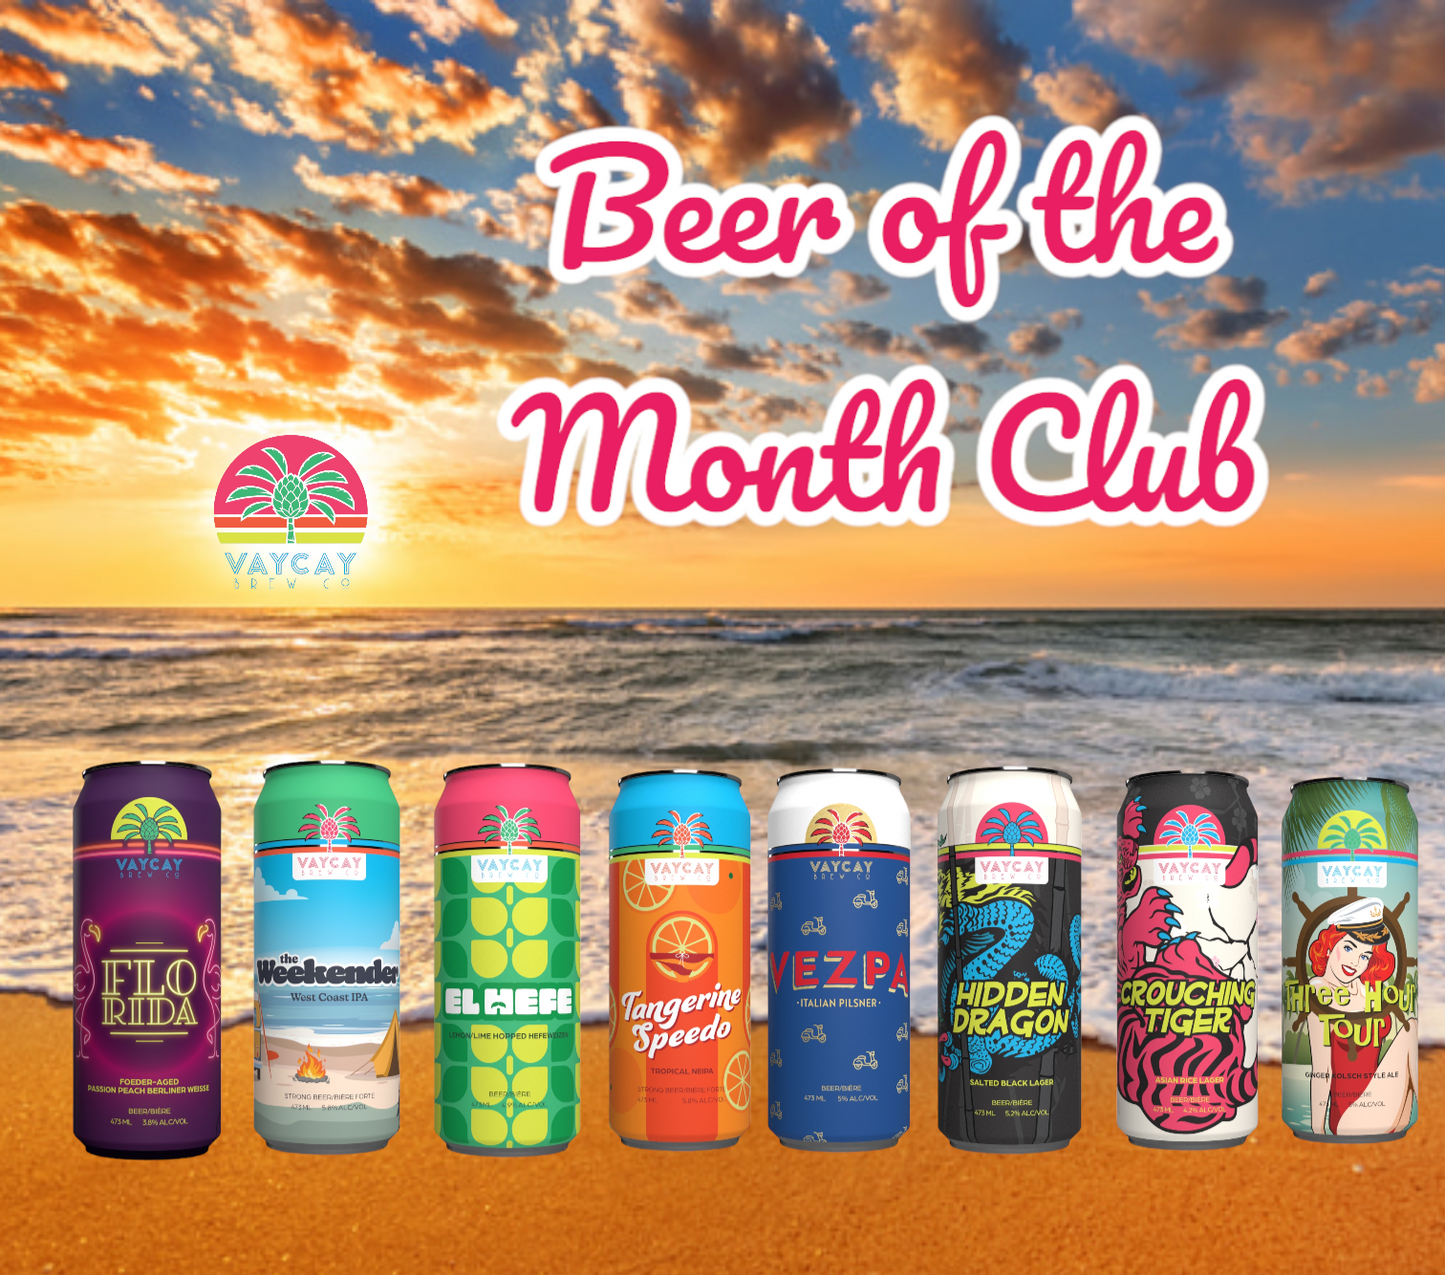 Beer of the Month Club - Hotel Package - 3 Month Subscription